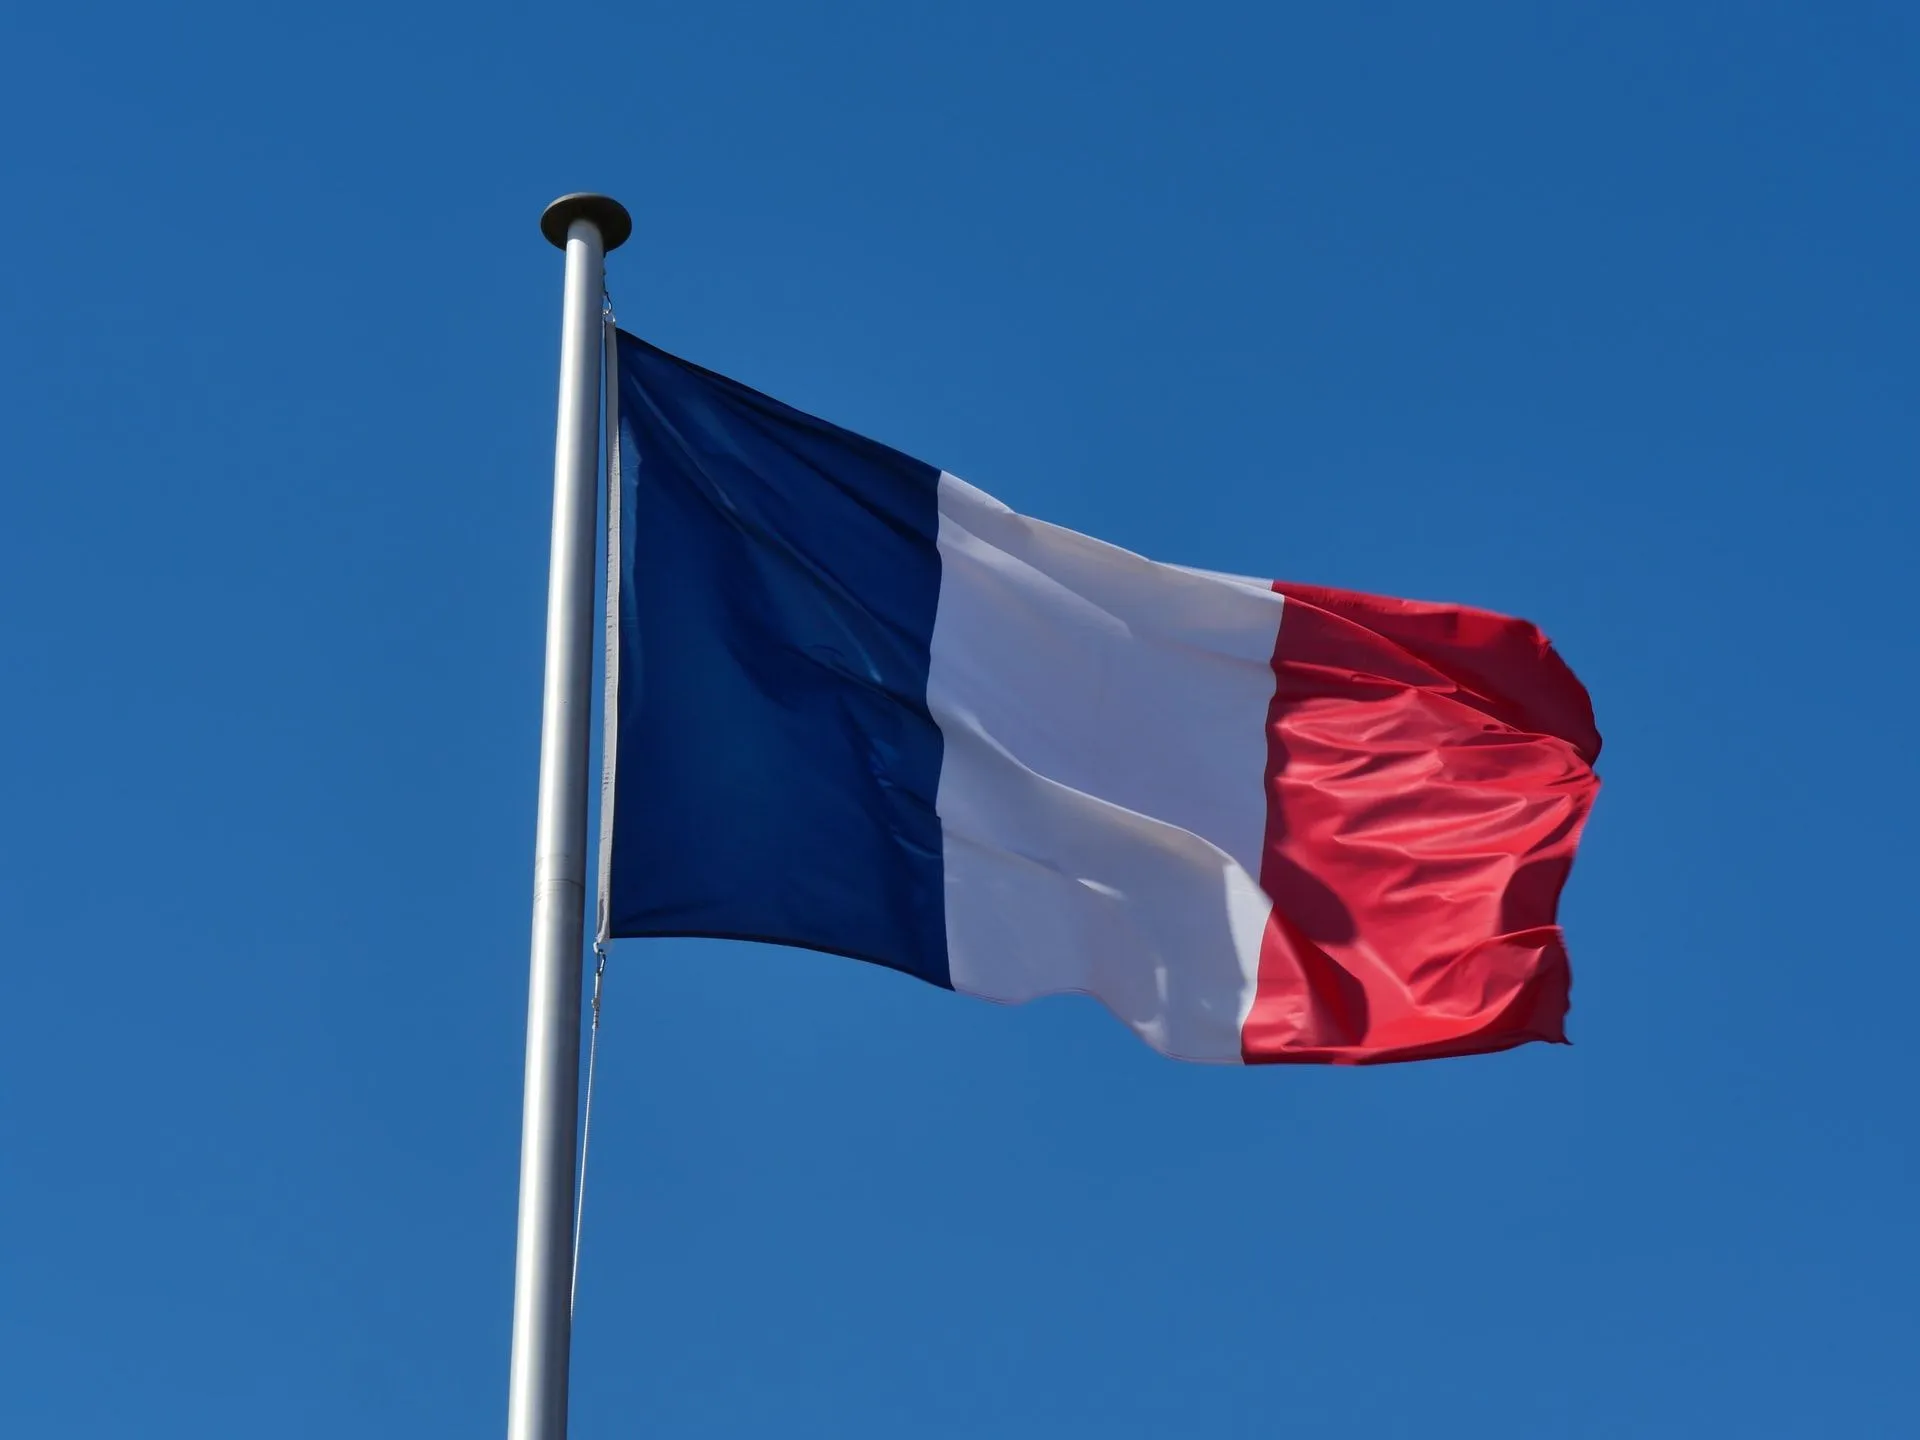 29 Facts About The French Flag To Explain Its Meaning